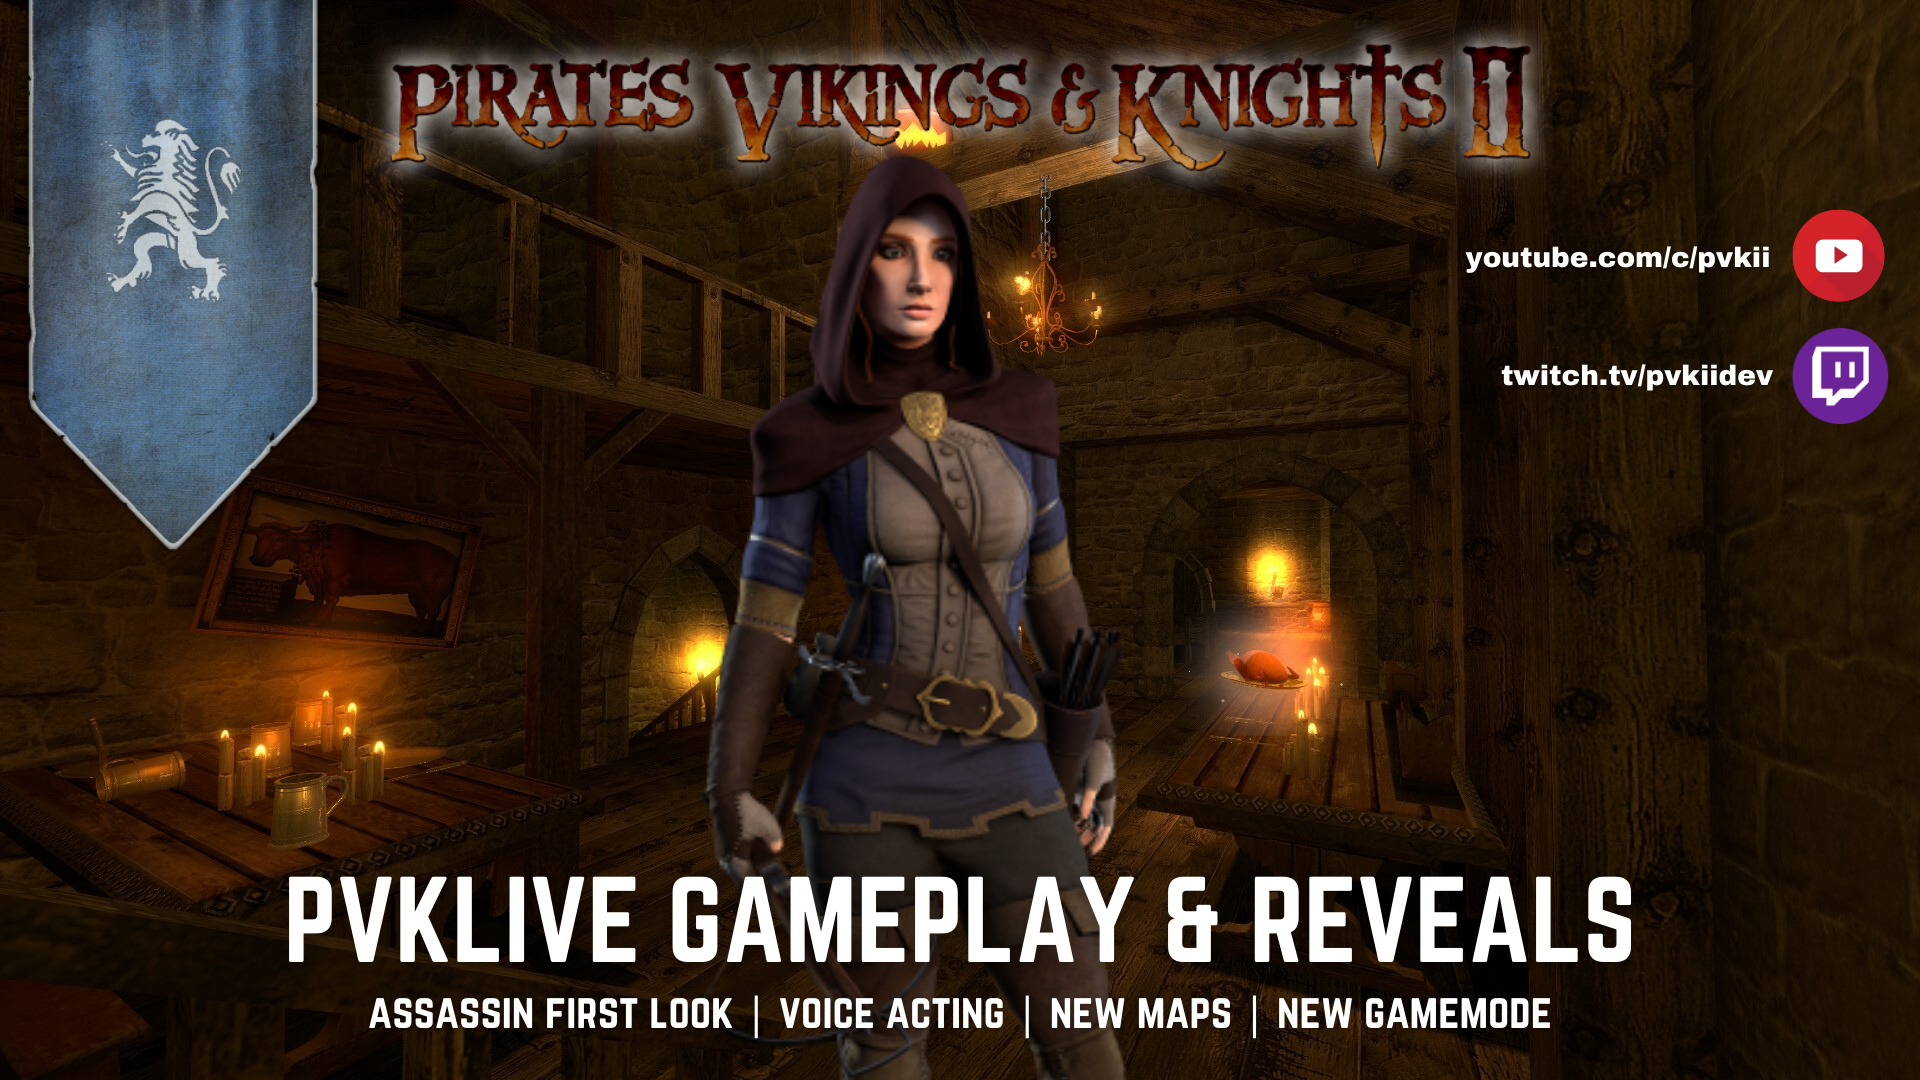 Pirates Vikings And Knights Ii Pvklive Gamplay Assassin Voice Acting New Maps And Gamemode Reveals Steam News